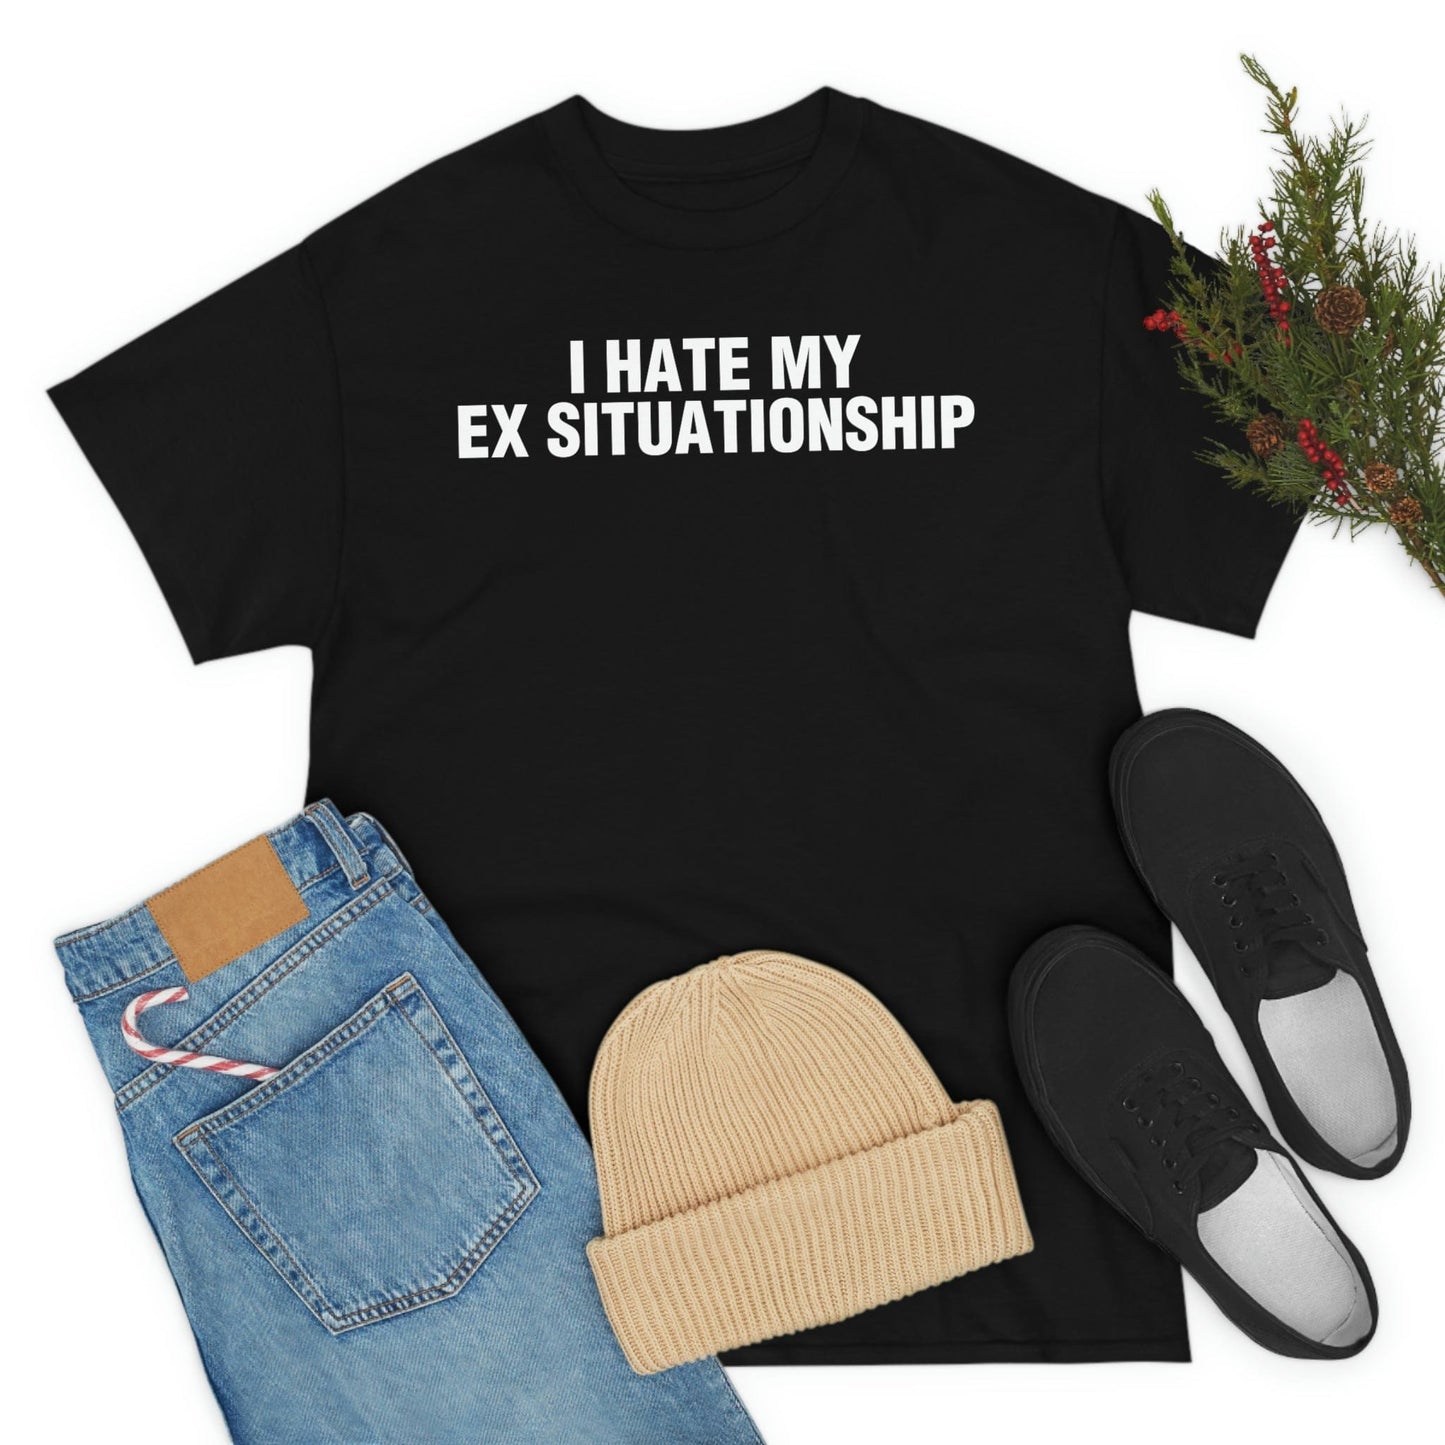 I HATE MY EX SITUATIONSHIP